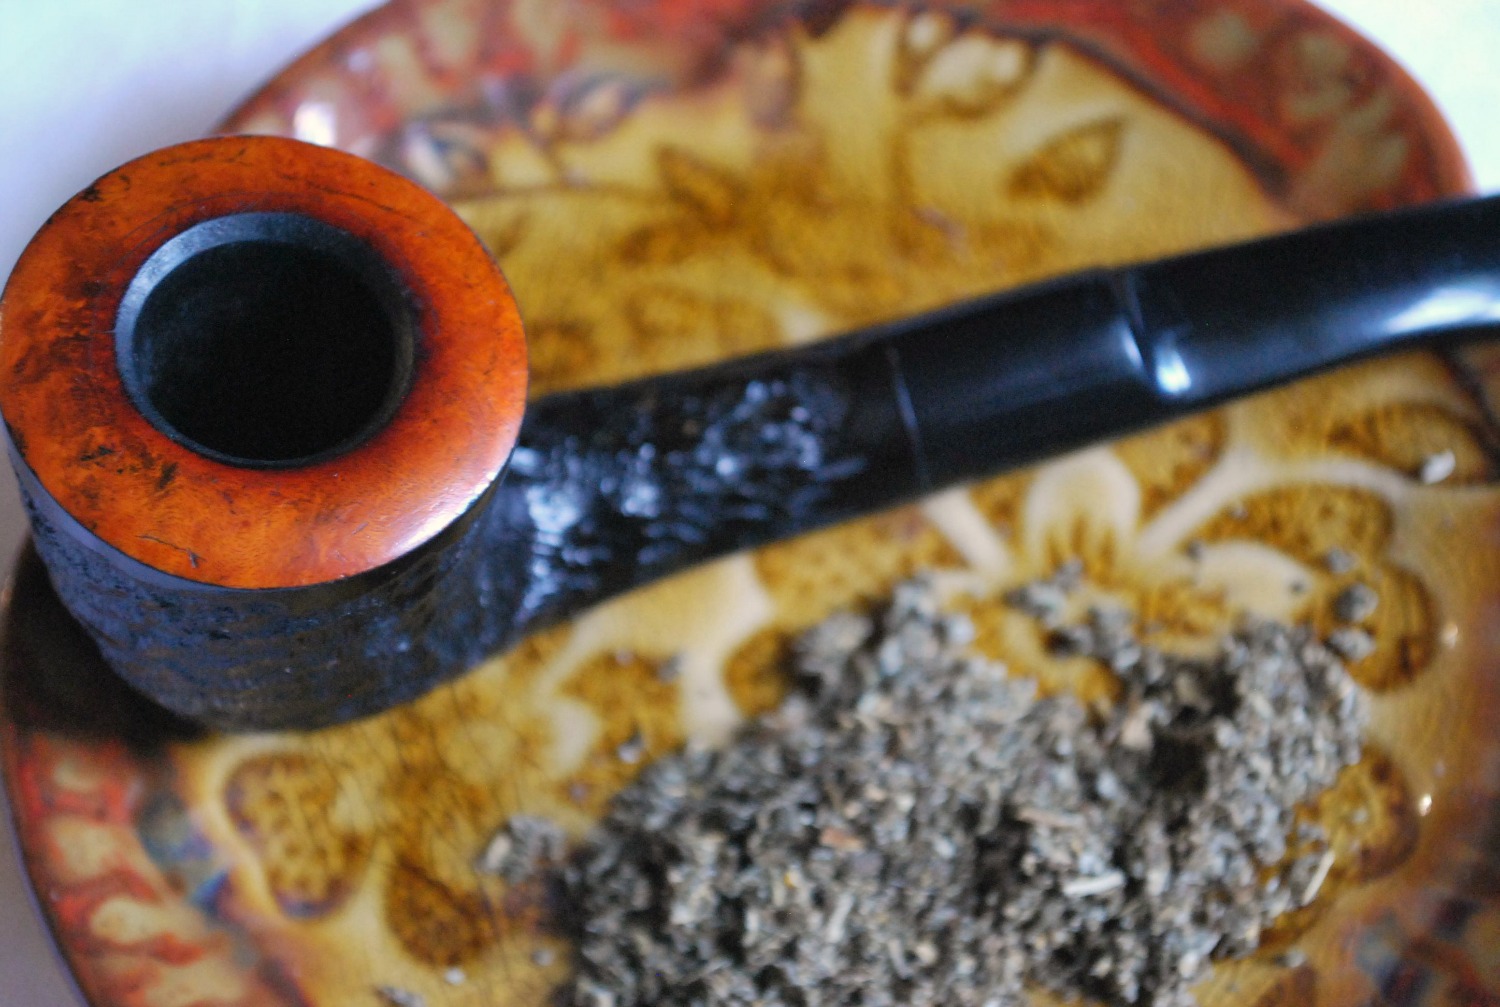 How To Craft Your Own Herbal Smoking Blends | Herbal Academy | Learn how to create your own herbal smoking blend for health or pleasure.